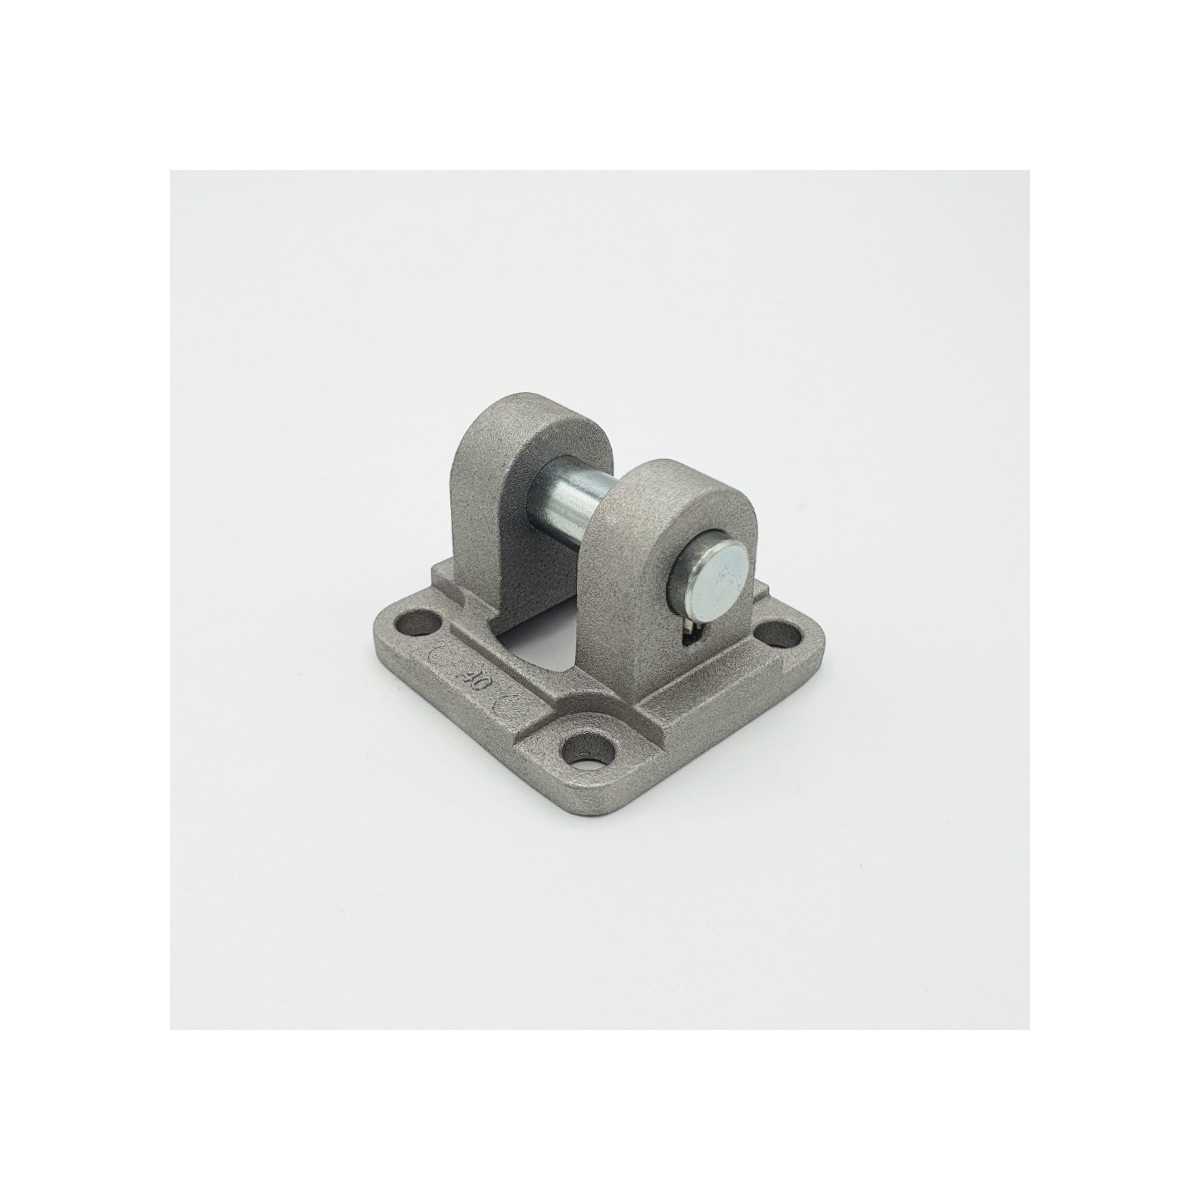 Fork mount for spherical swivel bearings (RS/RM/NYD) | Beta Online Shop